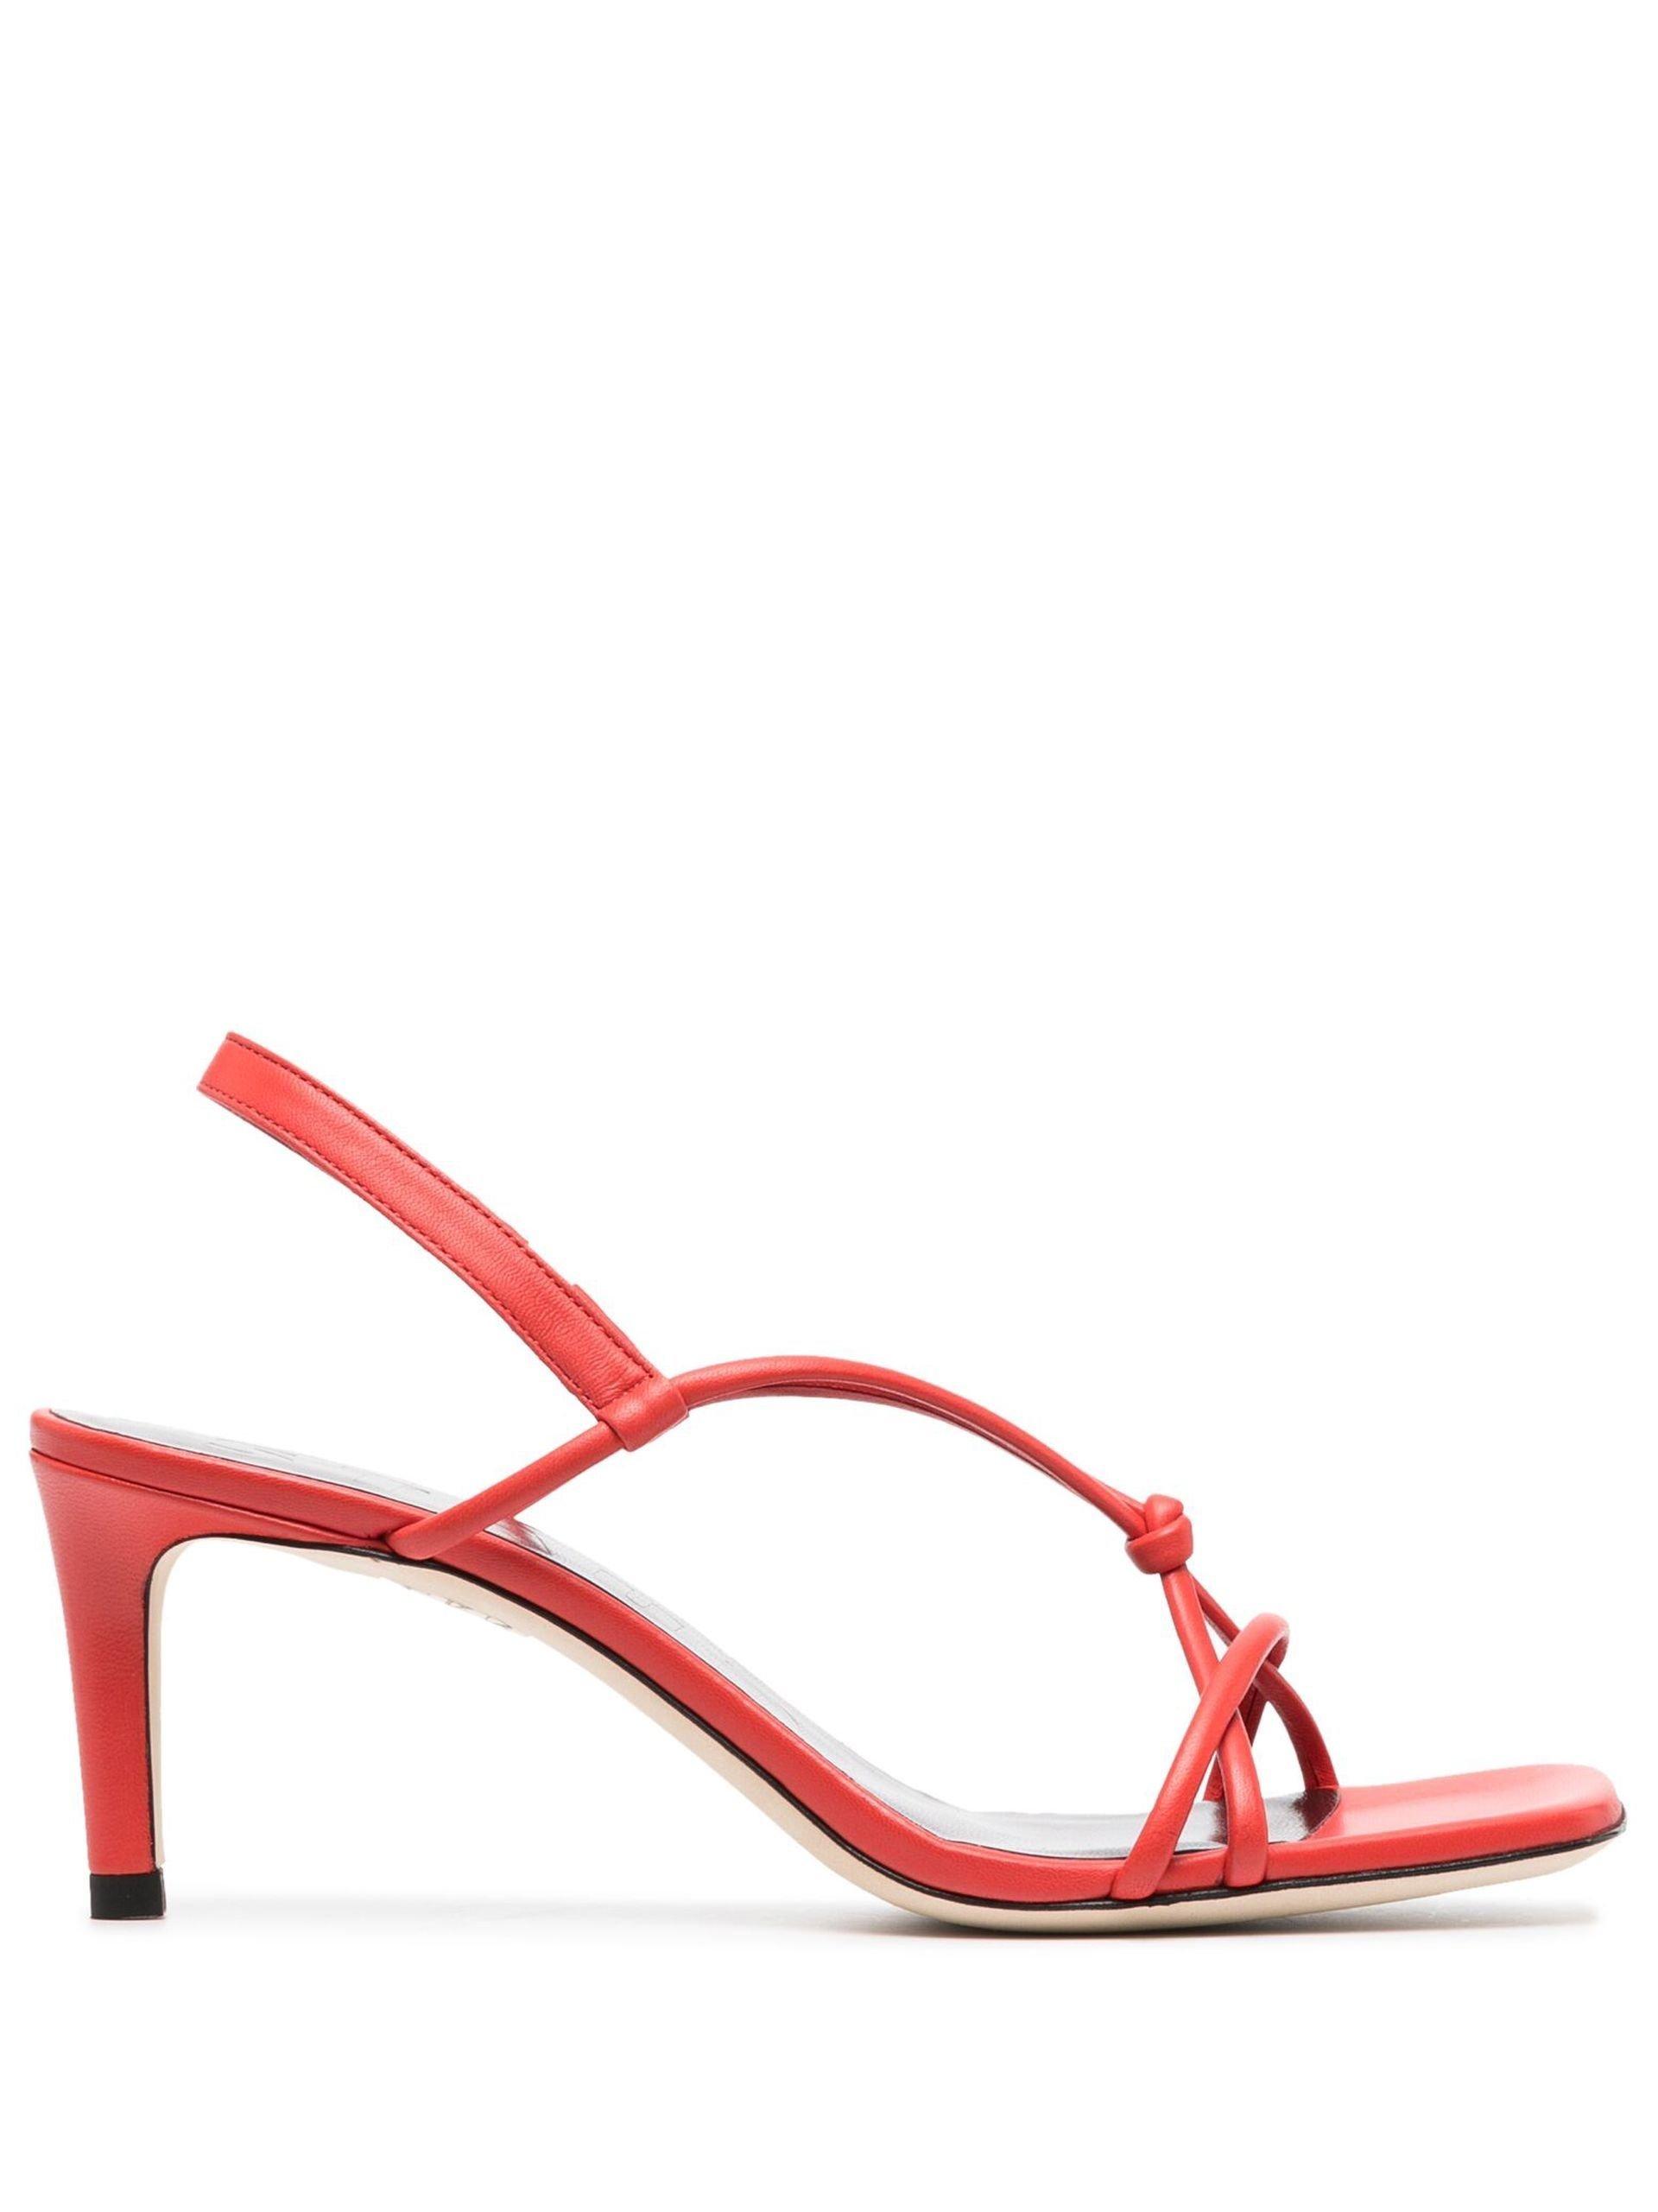 STAUD Nicolette 65 Leather Sandals in Pink | Lyst